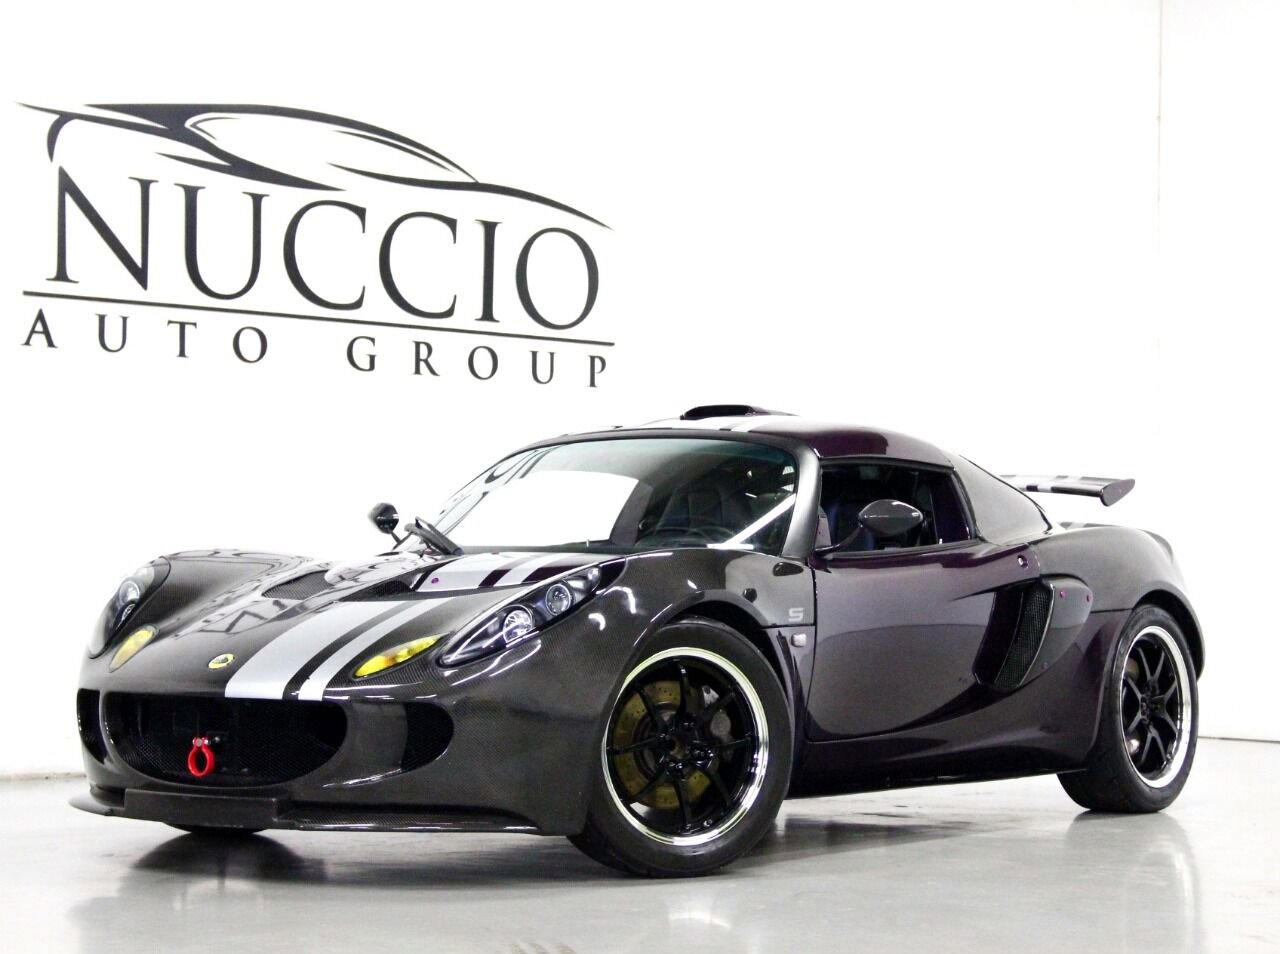 Used Lotus Exige for Sale Right Now - Autotrader